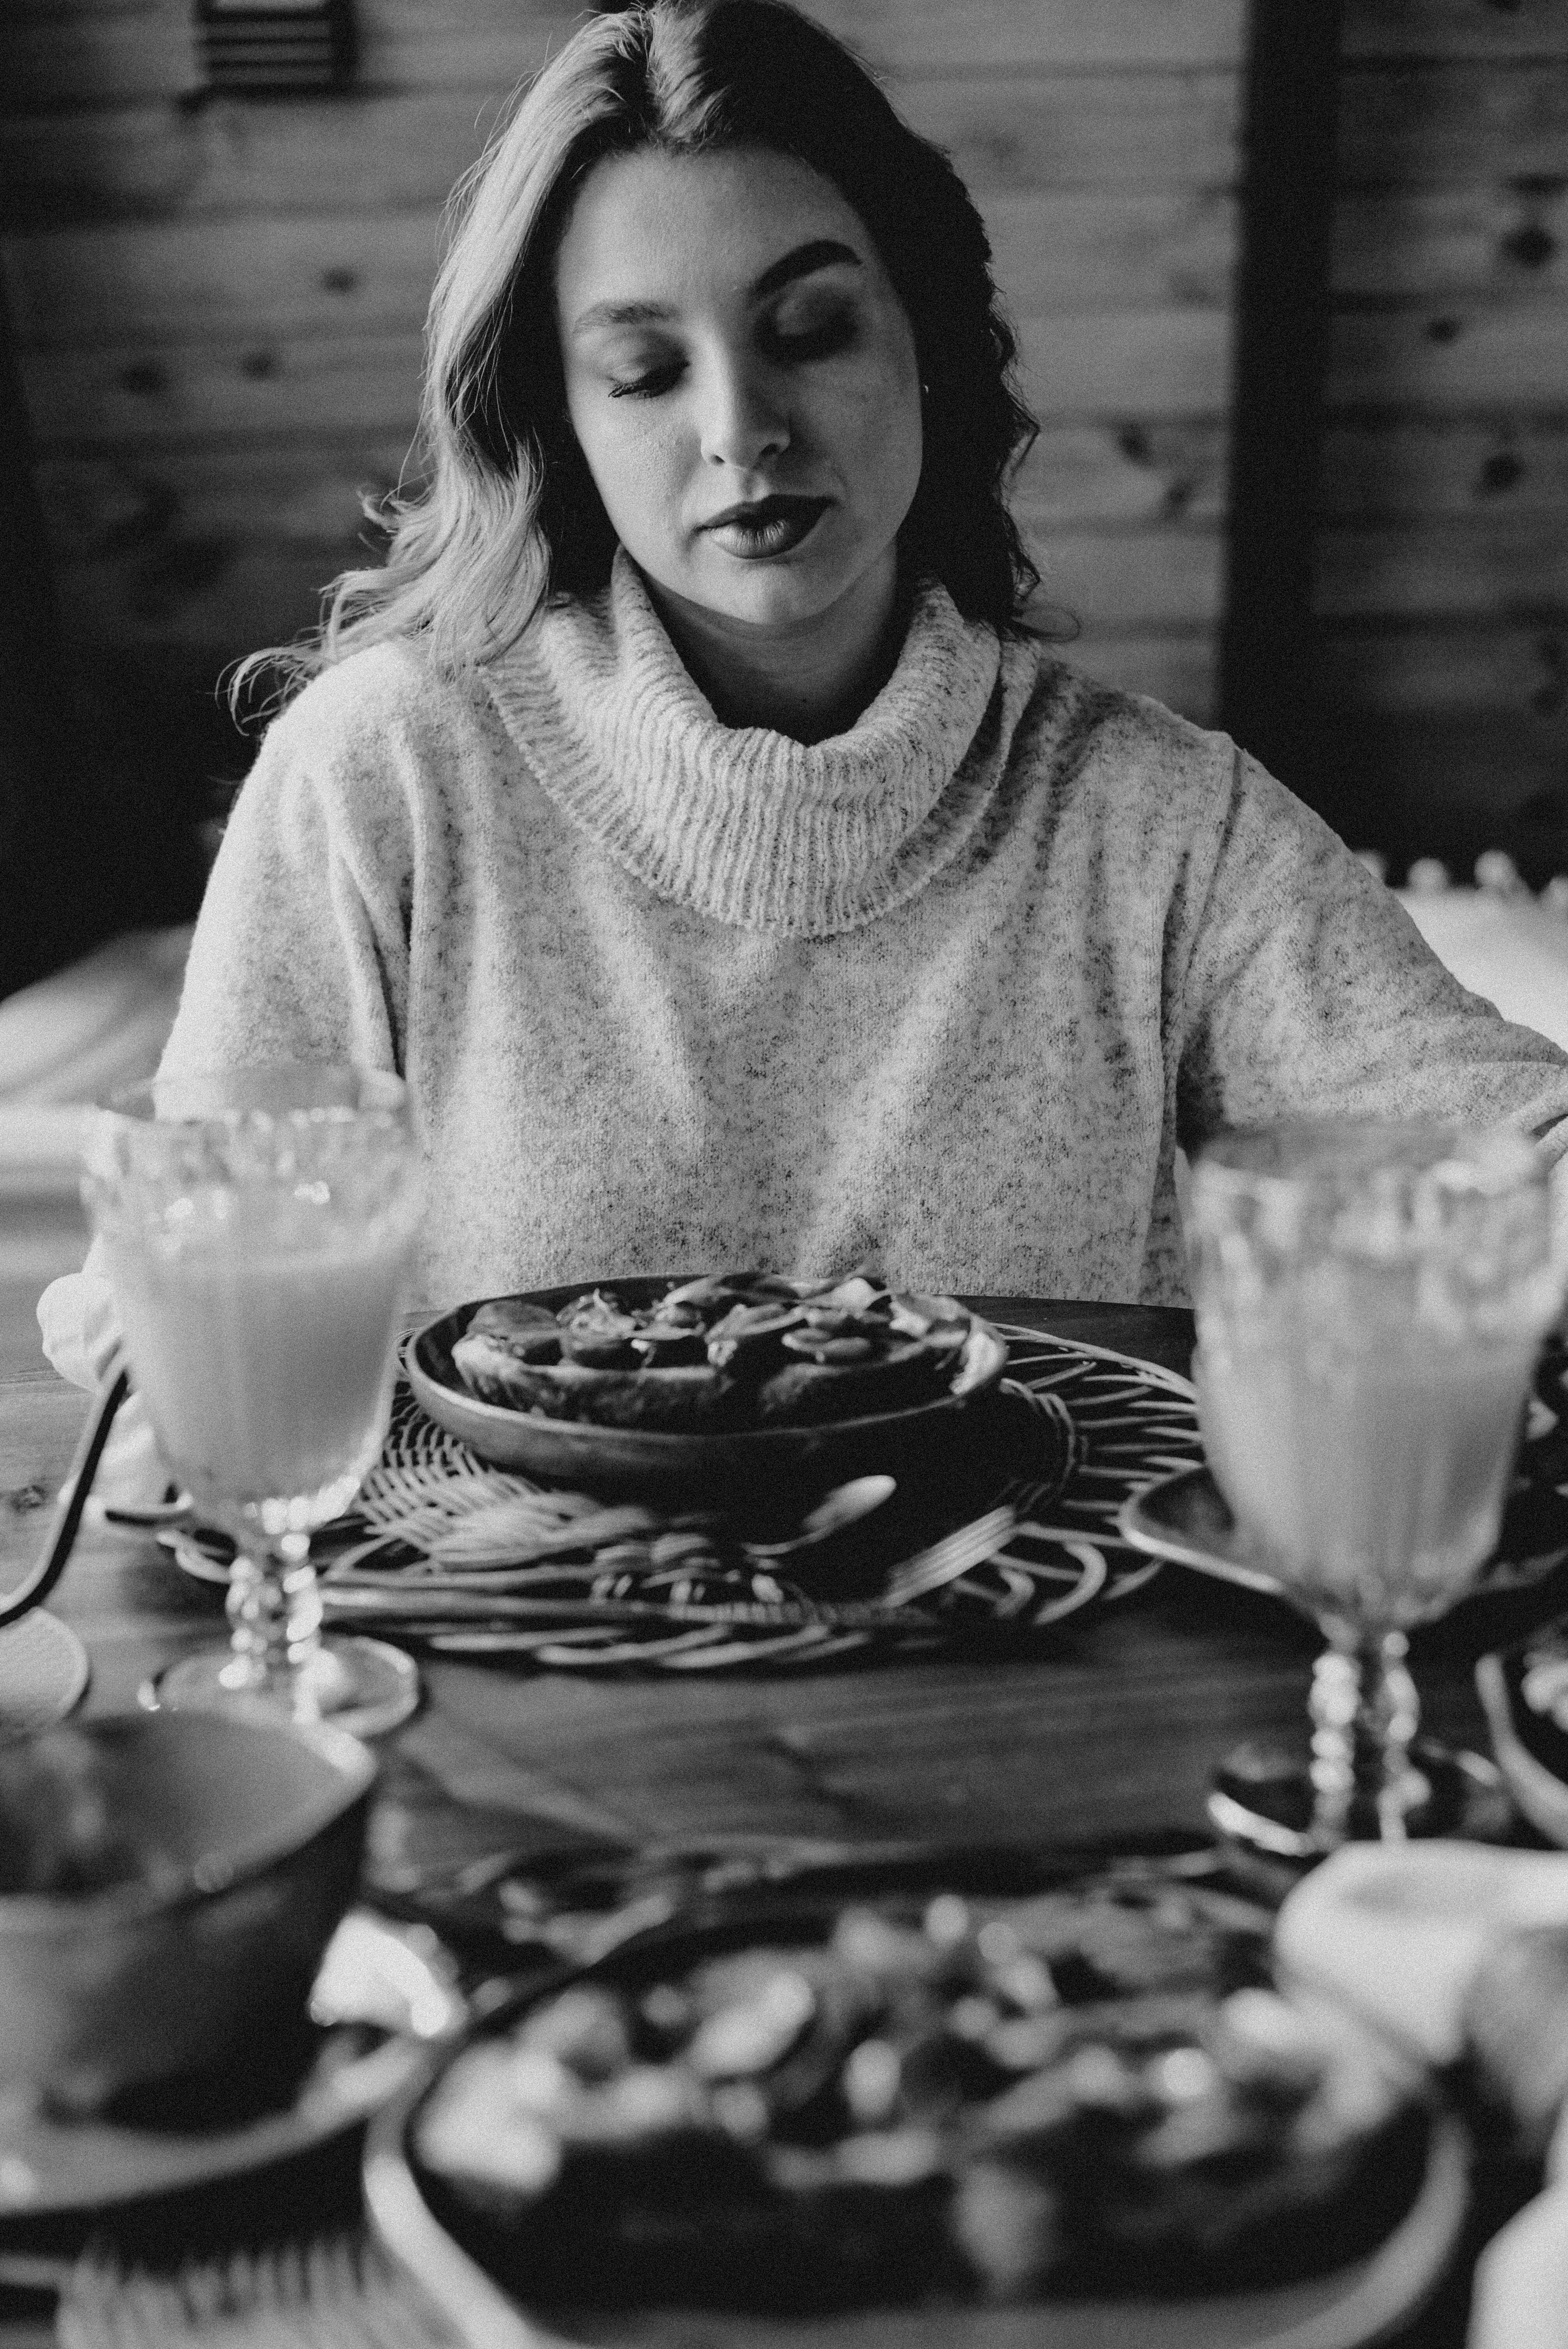 A woman looking at a meal | Source: Pexels